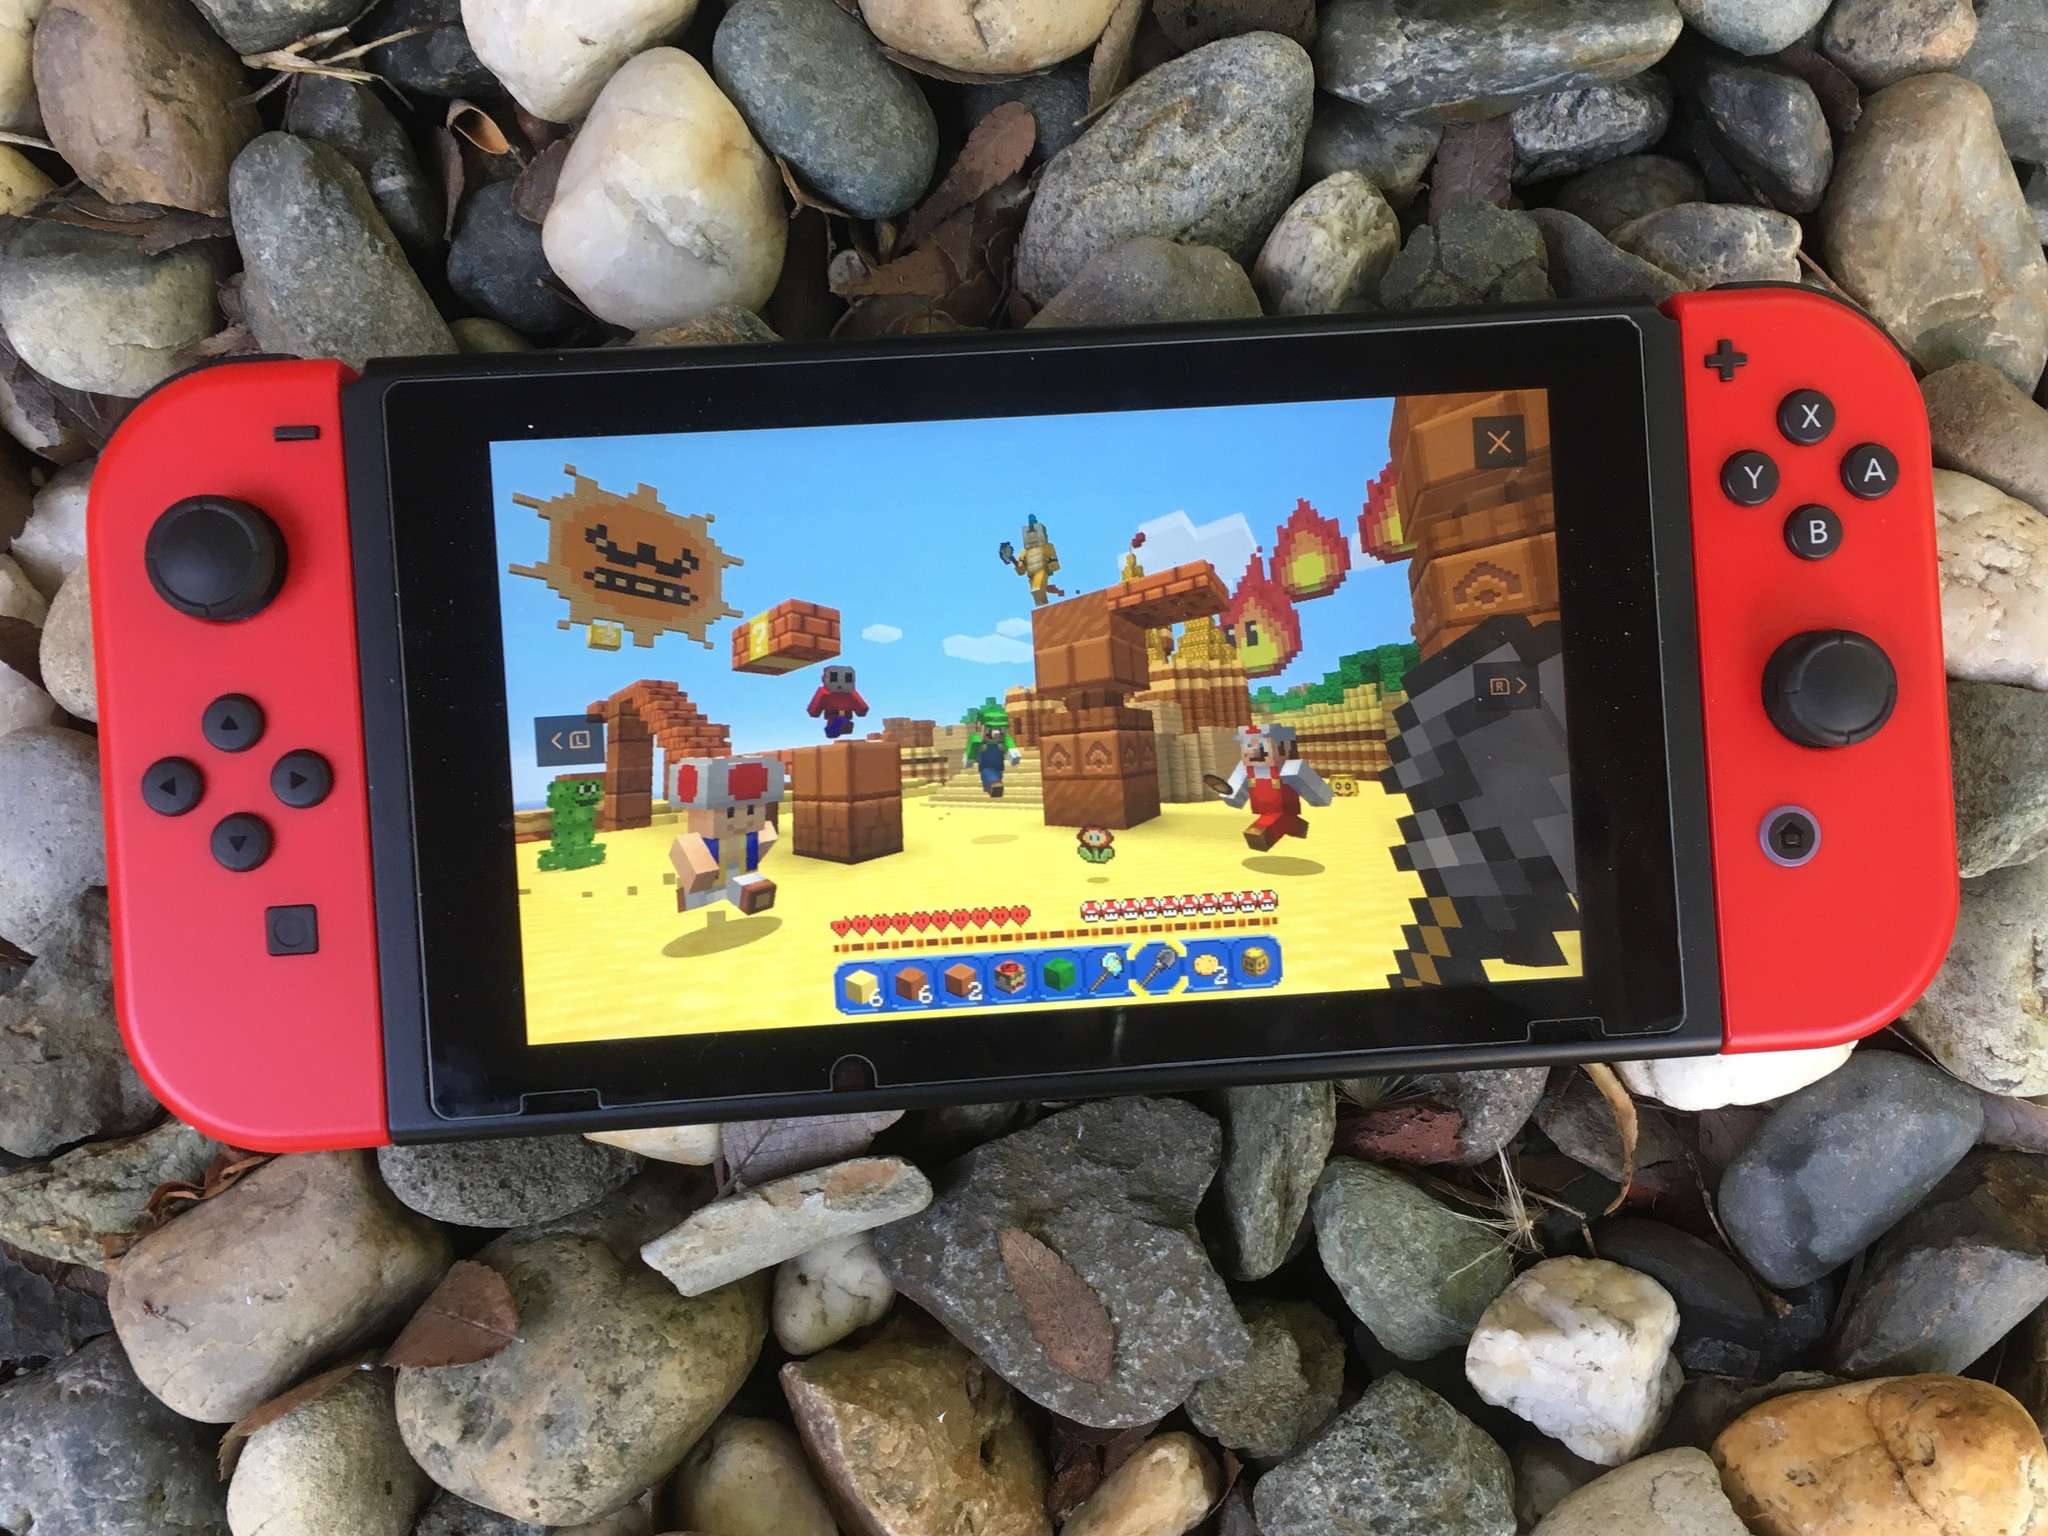 nintendo switch with minecraft game